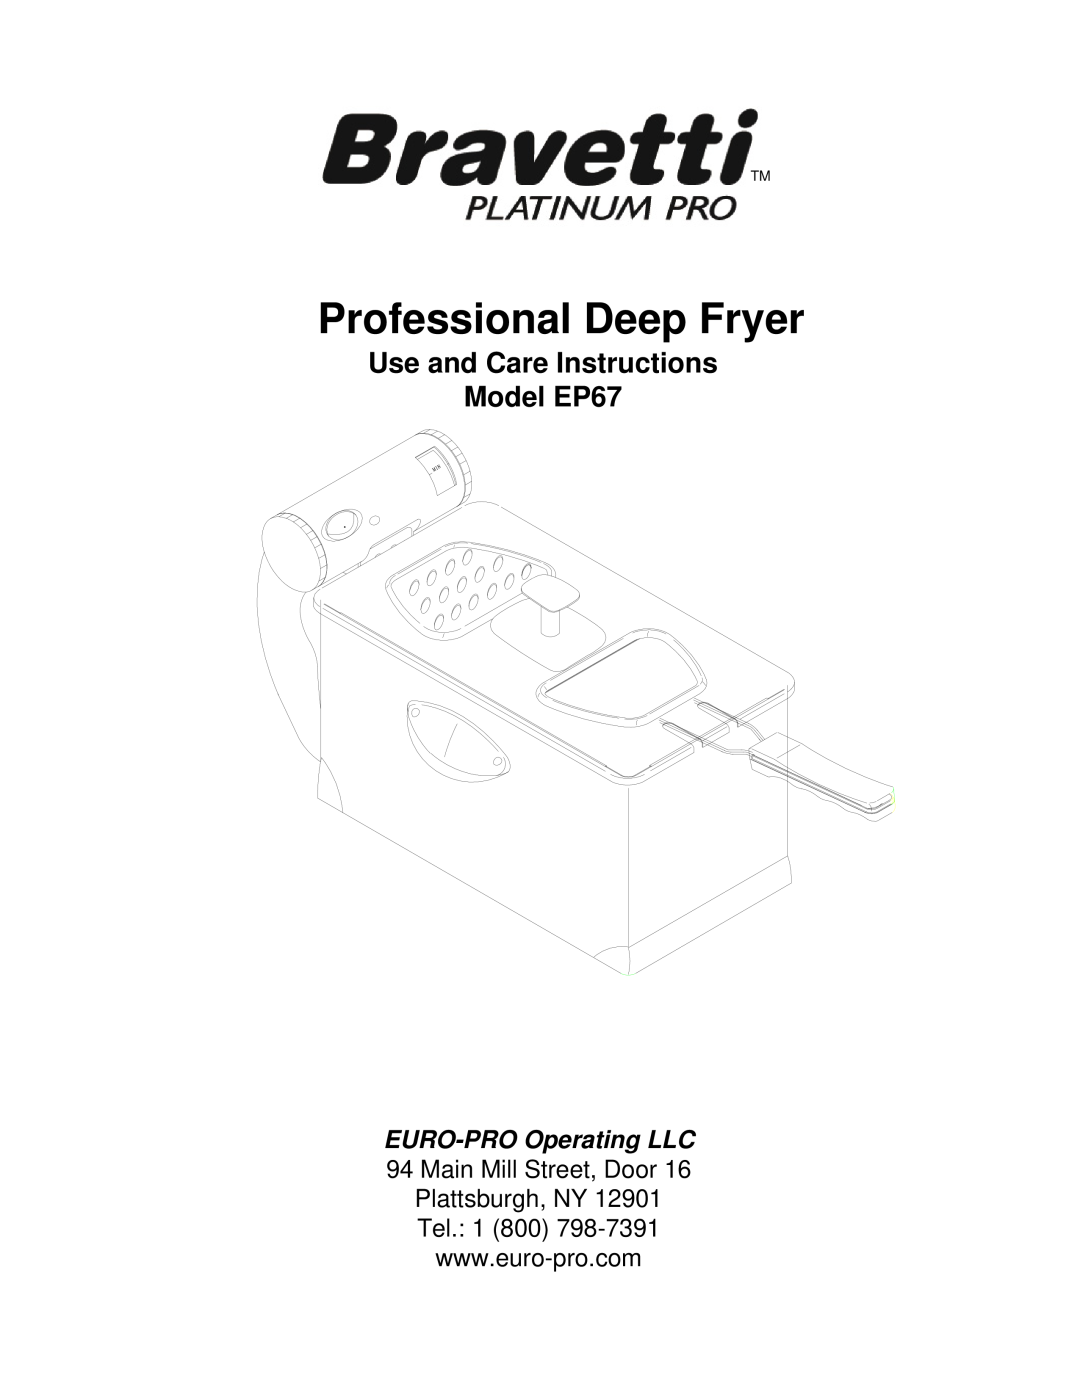 Bravetti manual Professional Deep Fryer, Use and Care Instructions Model EP67, EURO-PROOperating LLC 